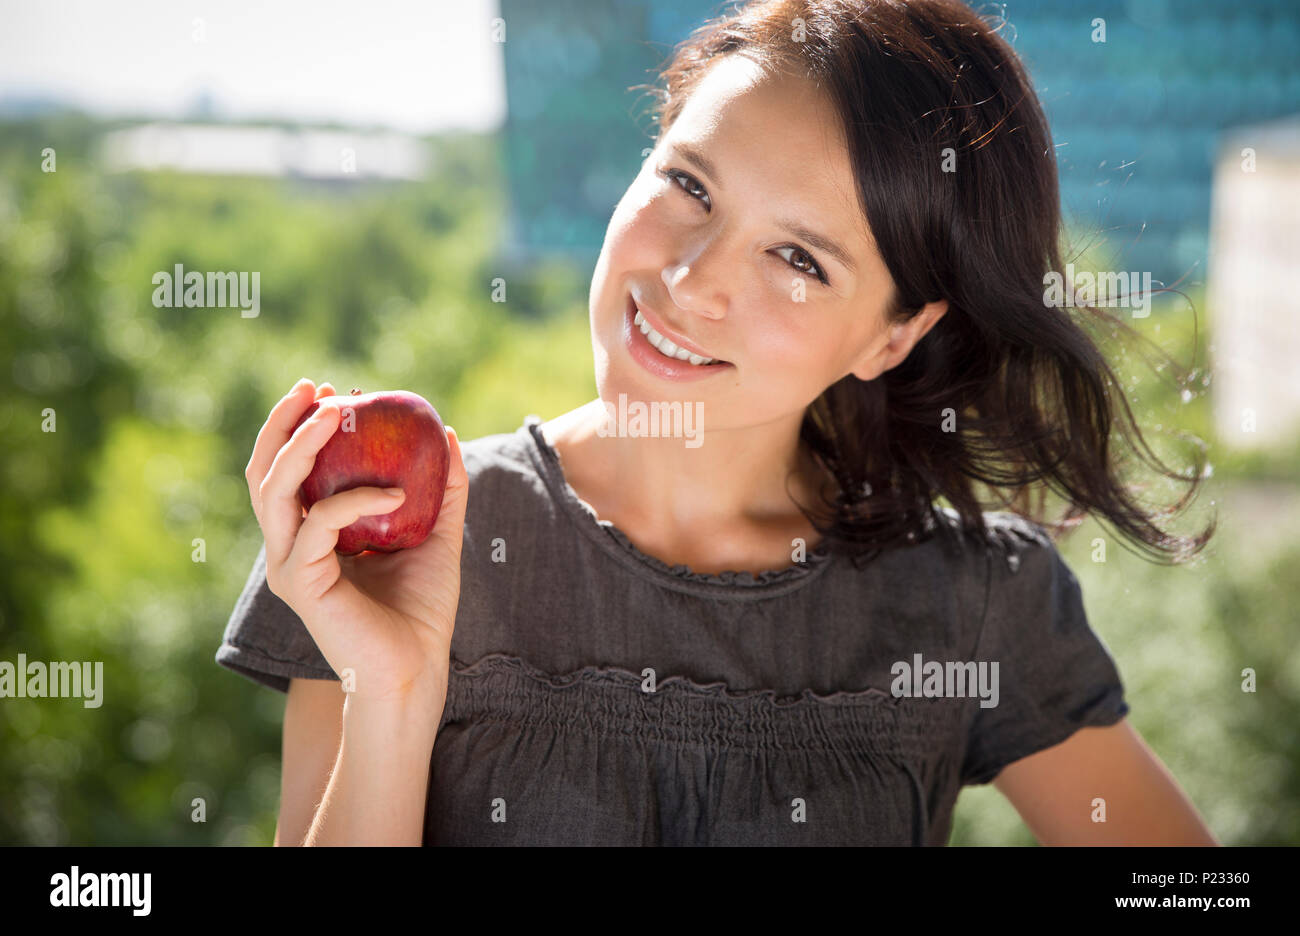 Young attractive woman holding red apple and smiling Banque D'Images